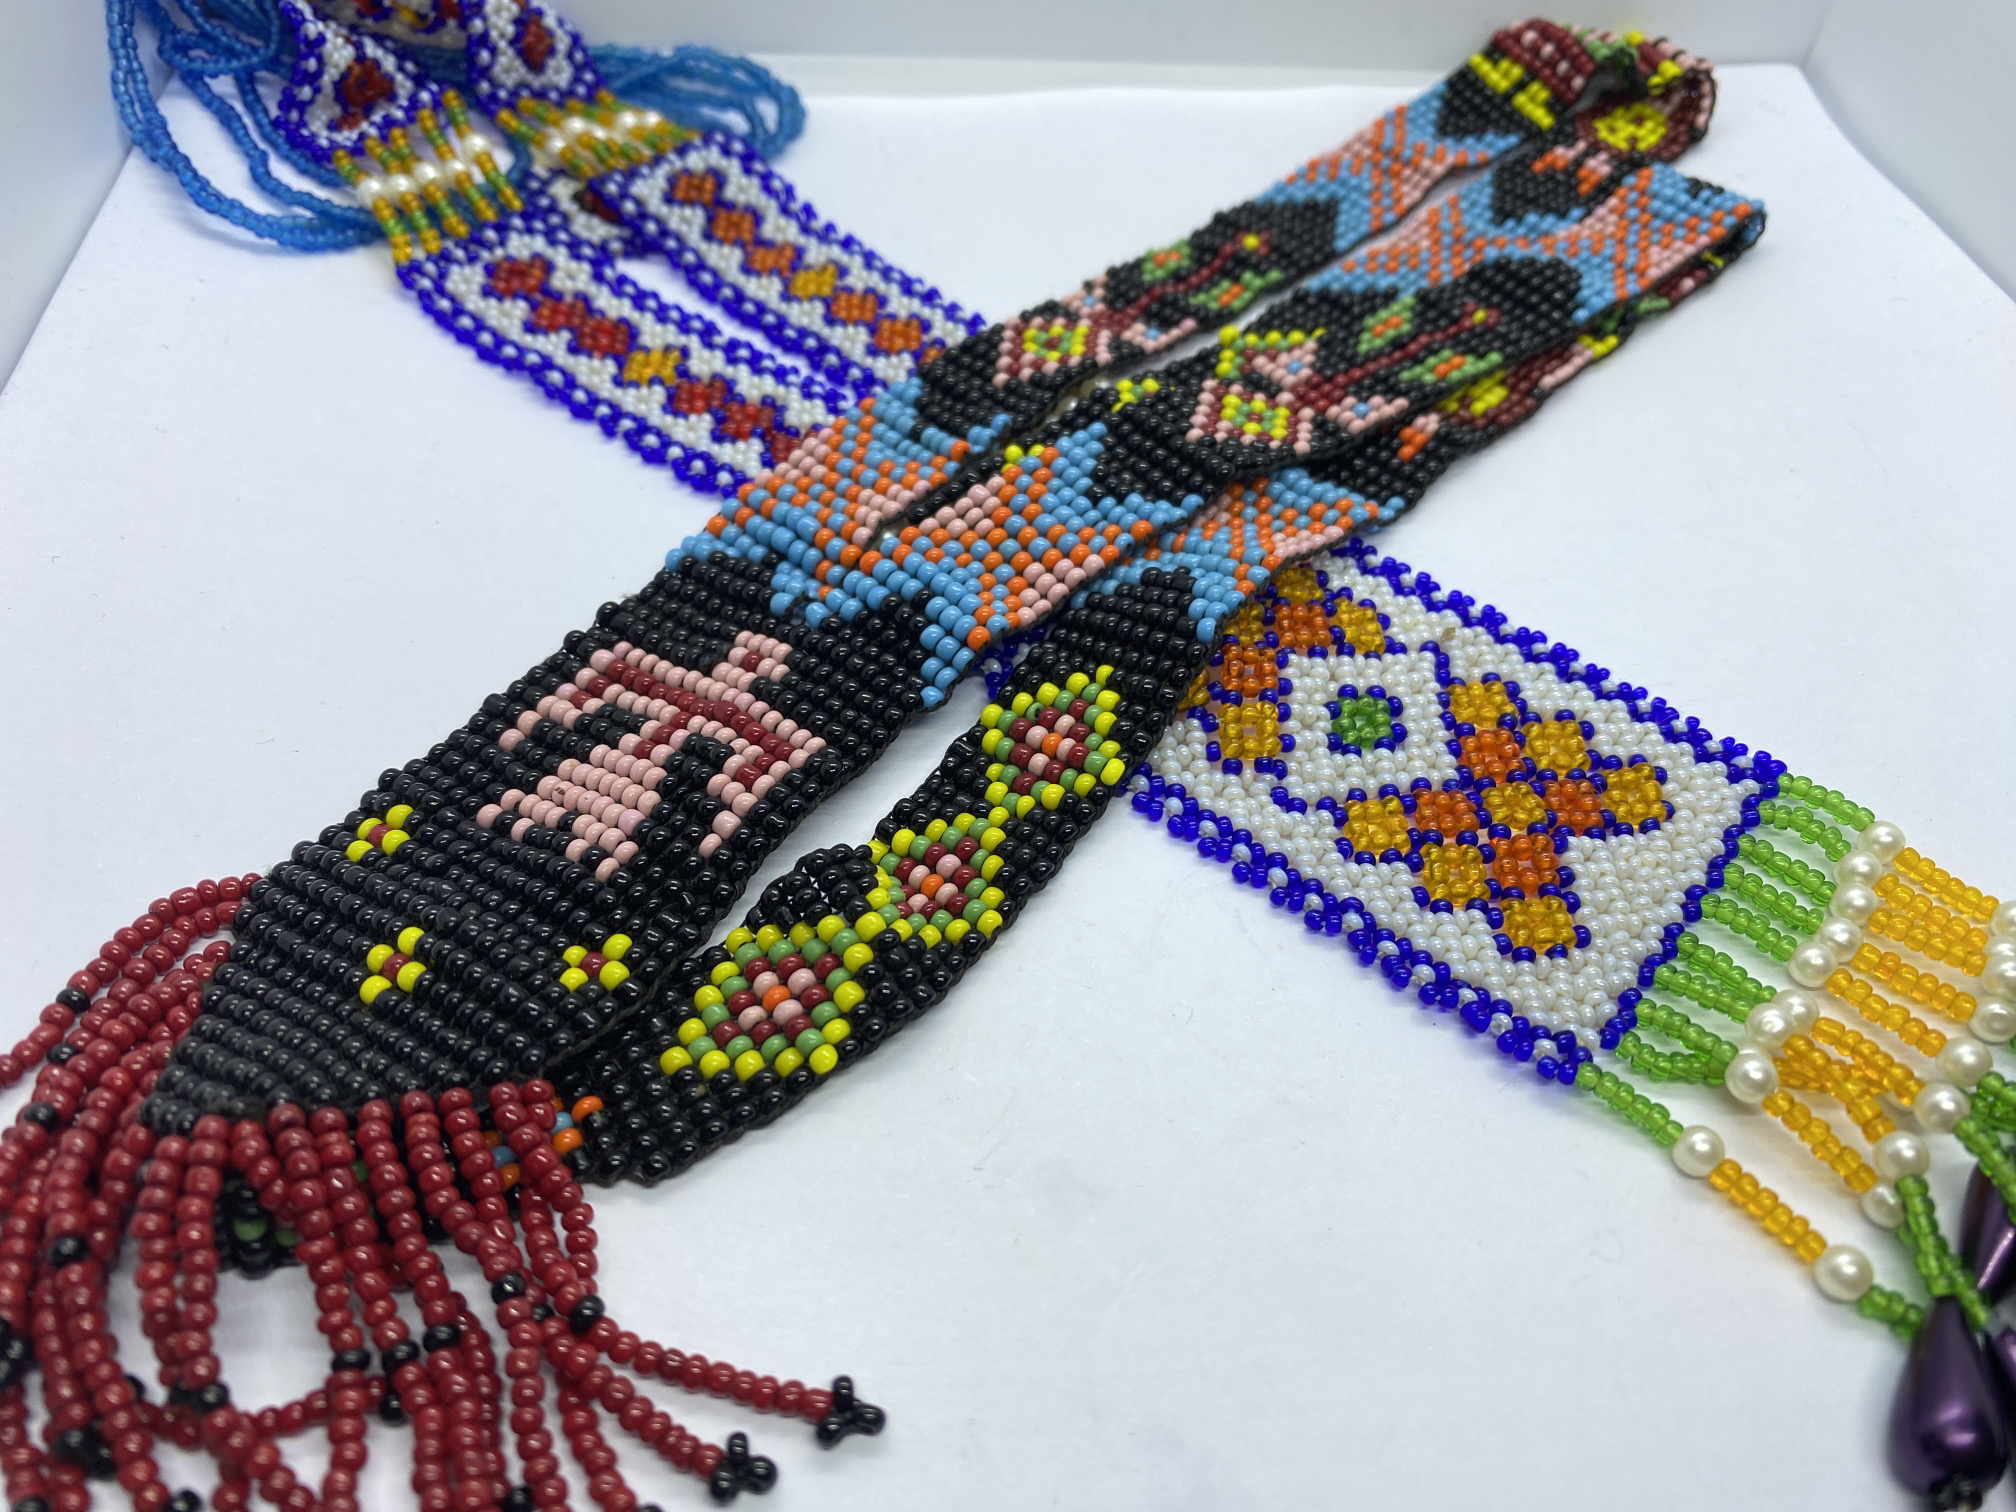 PAIR OF STUNNING UNUSUAL DETAILED BEADED LONG NECKLACES - Image 2 of 3